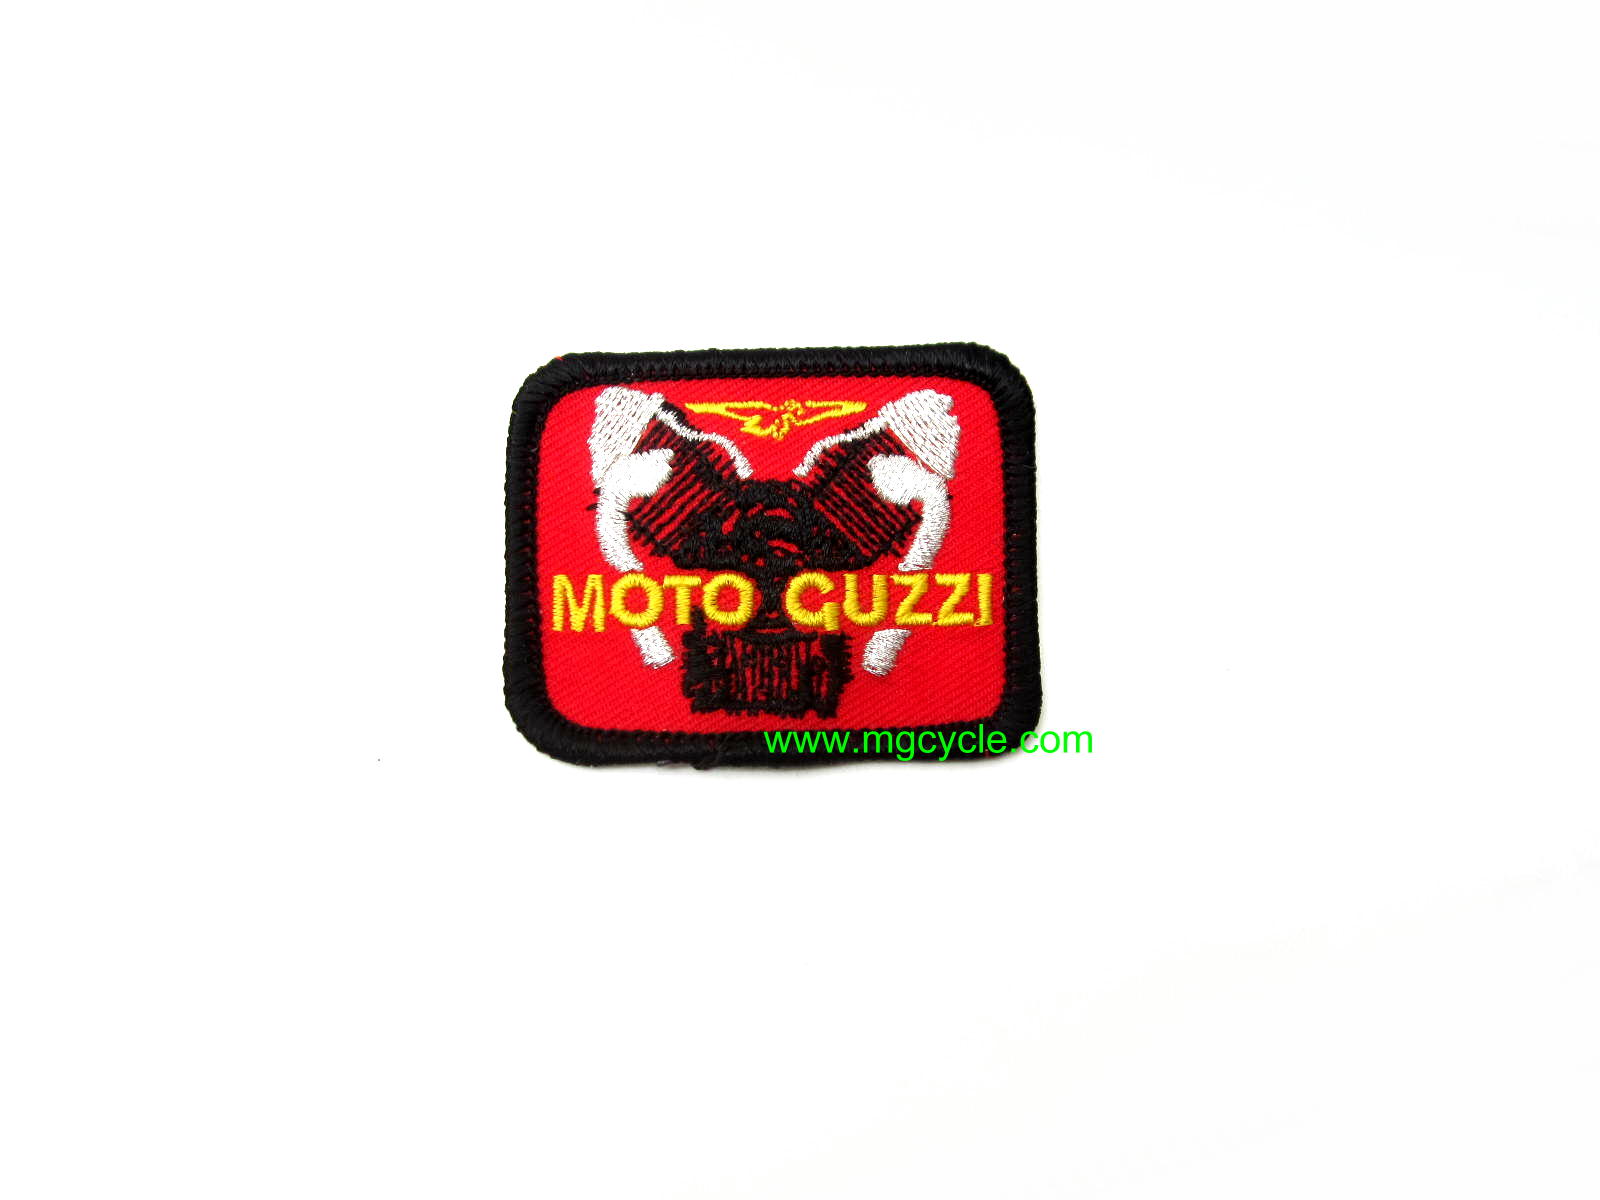 embroidered Guzzi engine patch, black on red, small rectangle